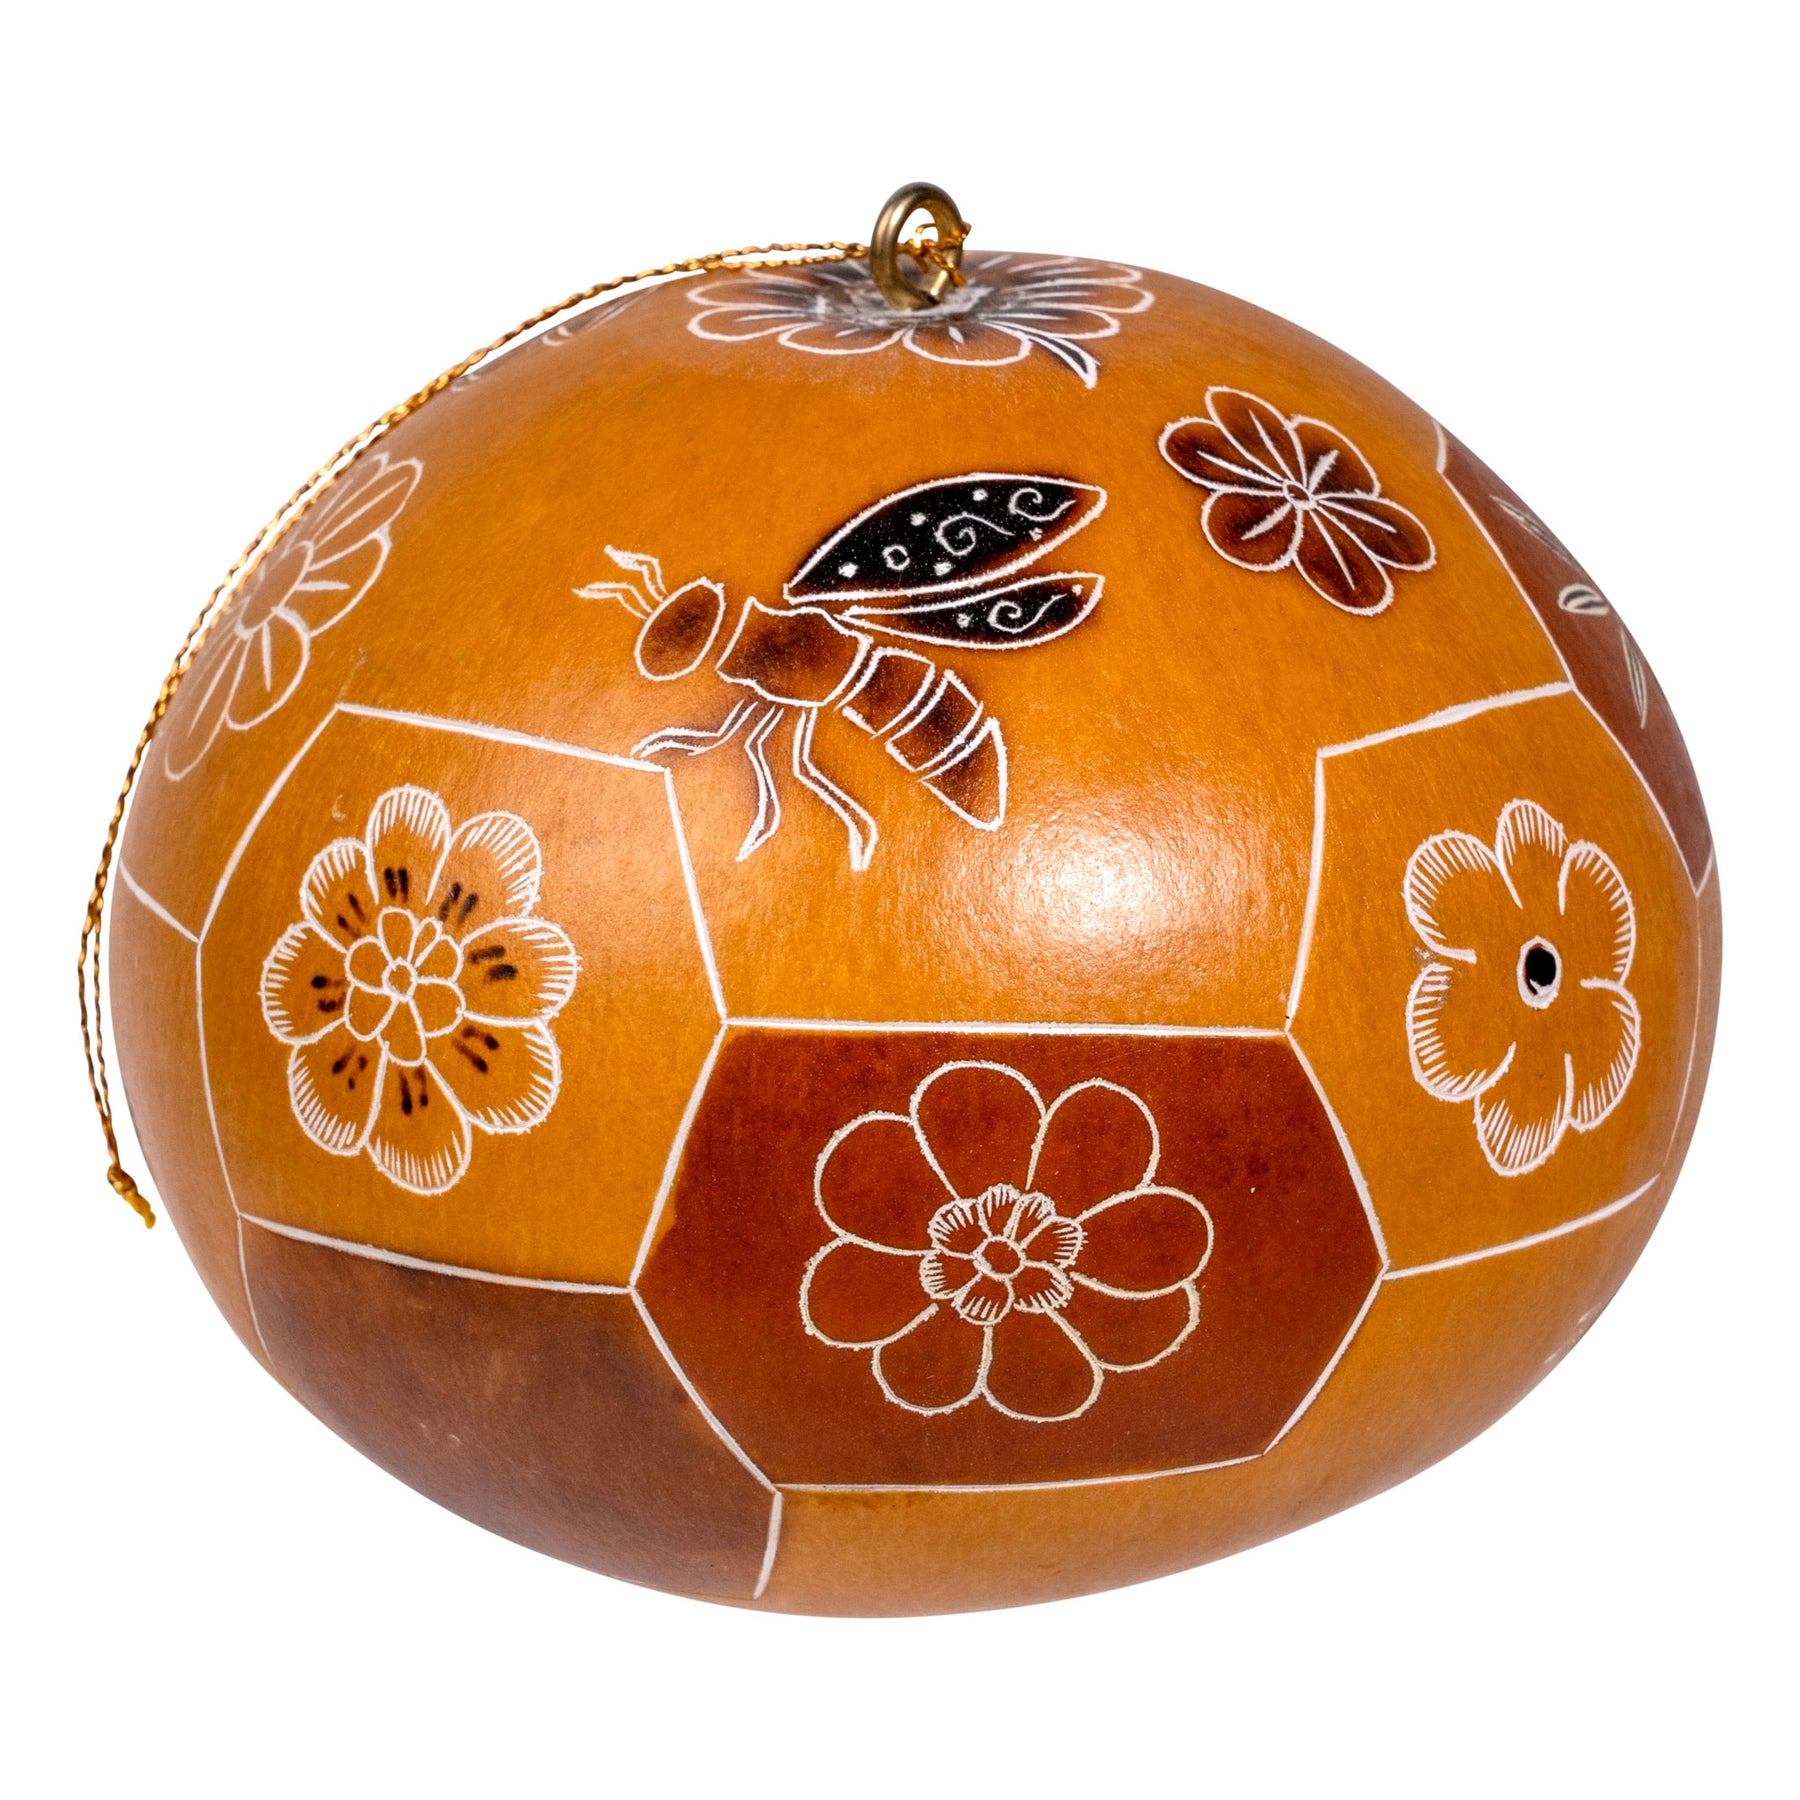 Bee Doodle - Gourd Ornament